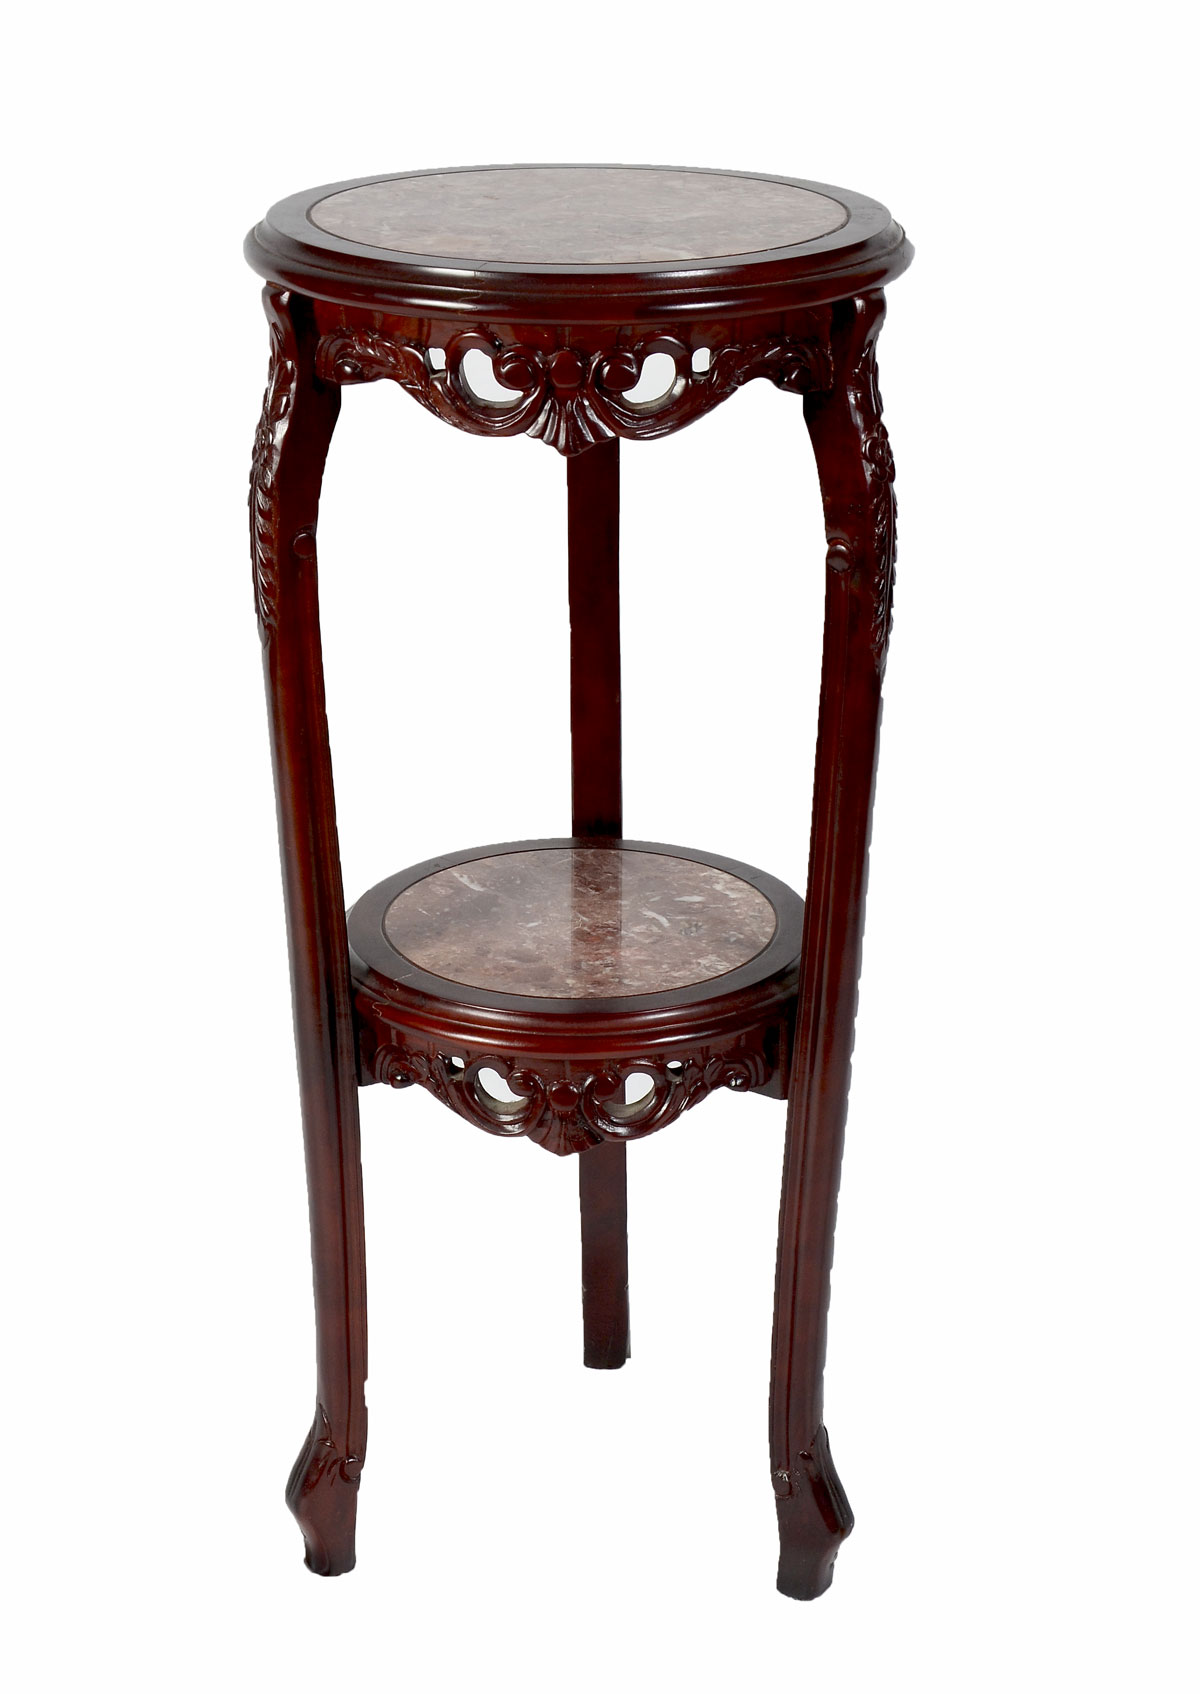 TWO-TIER CHINESE MARBLE PLANT STAND: